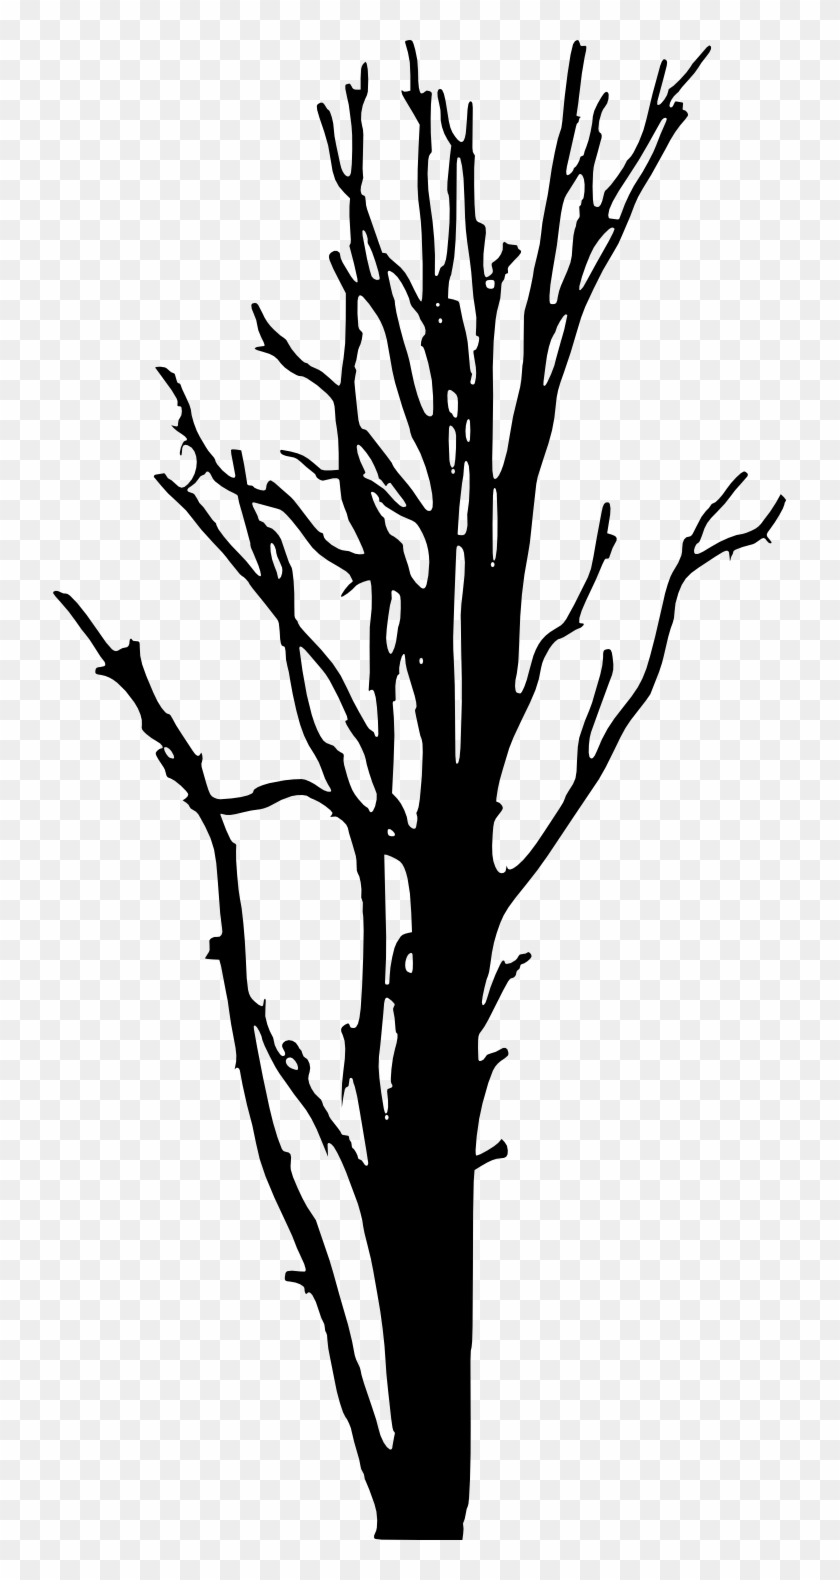 Woody Plant Tree Silhouette Clip Art - Portable Network Graphics #386026